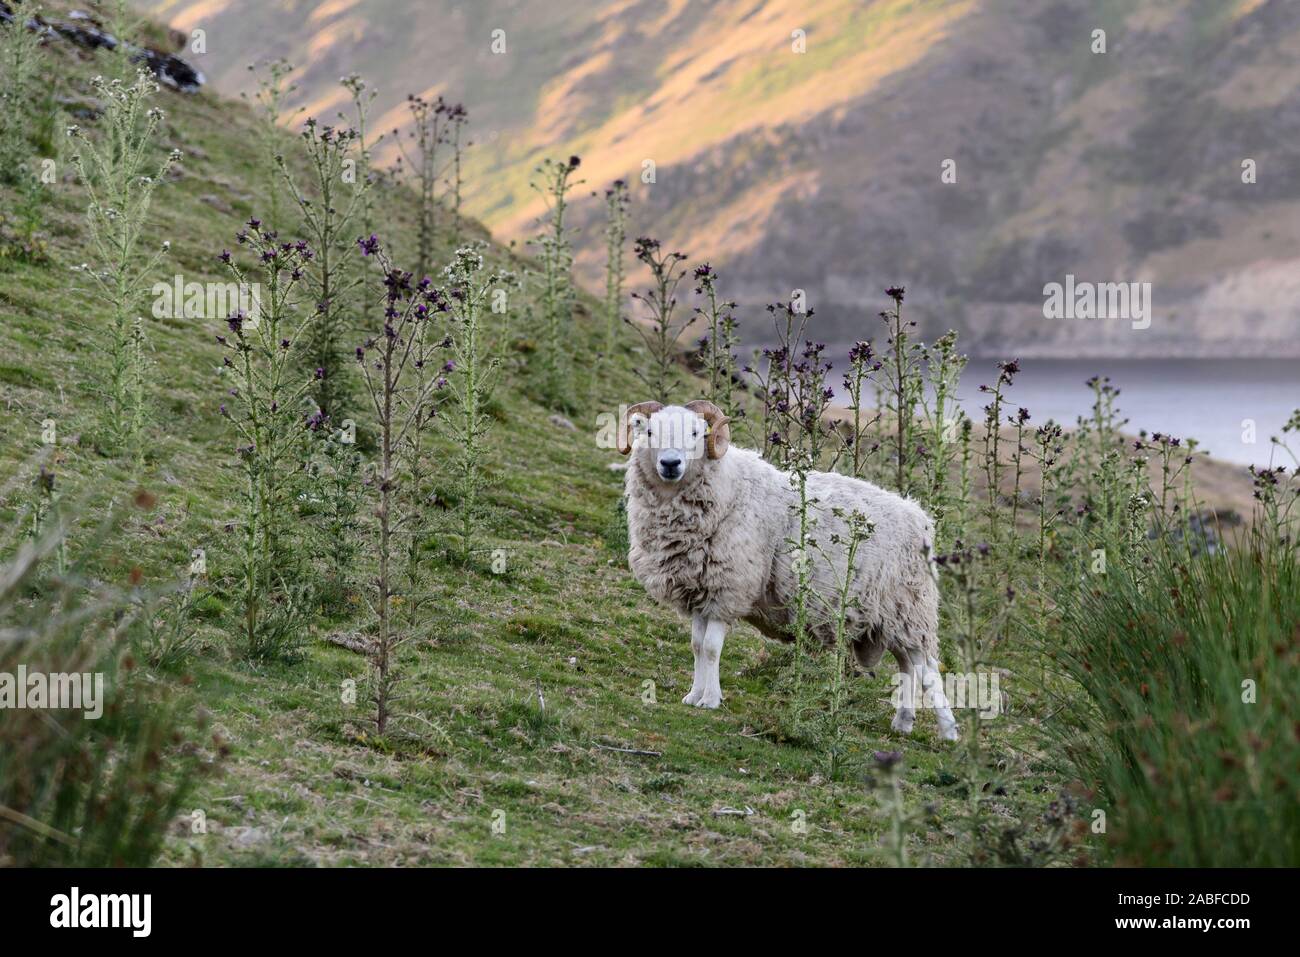 A single Ram, looking at the camera, in the natural landscape of mid Wales, UK. The hillside has multiple thistles growing Stock Photo